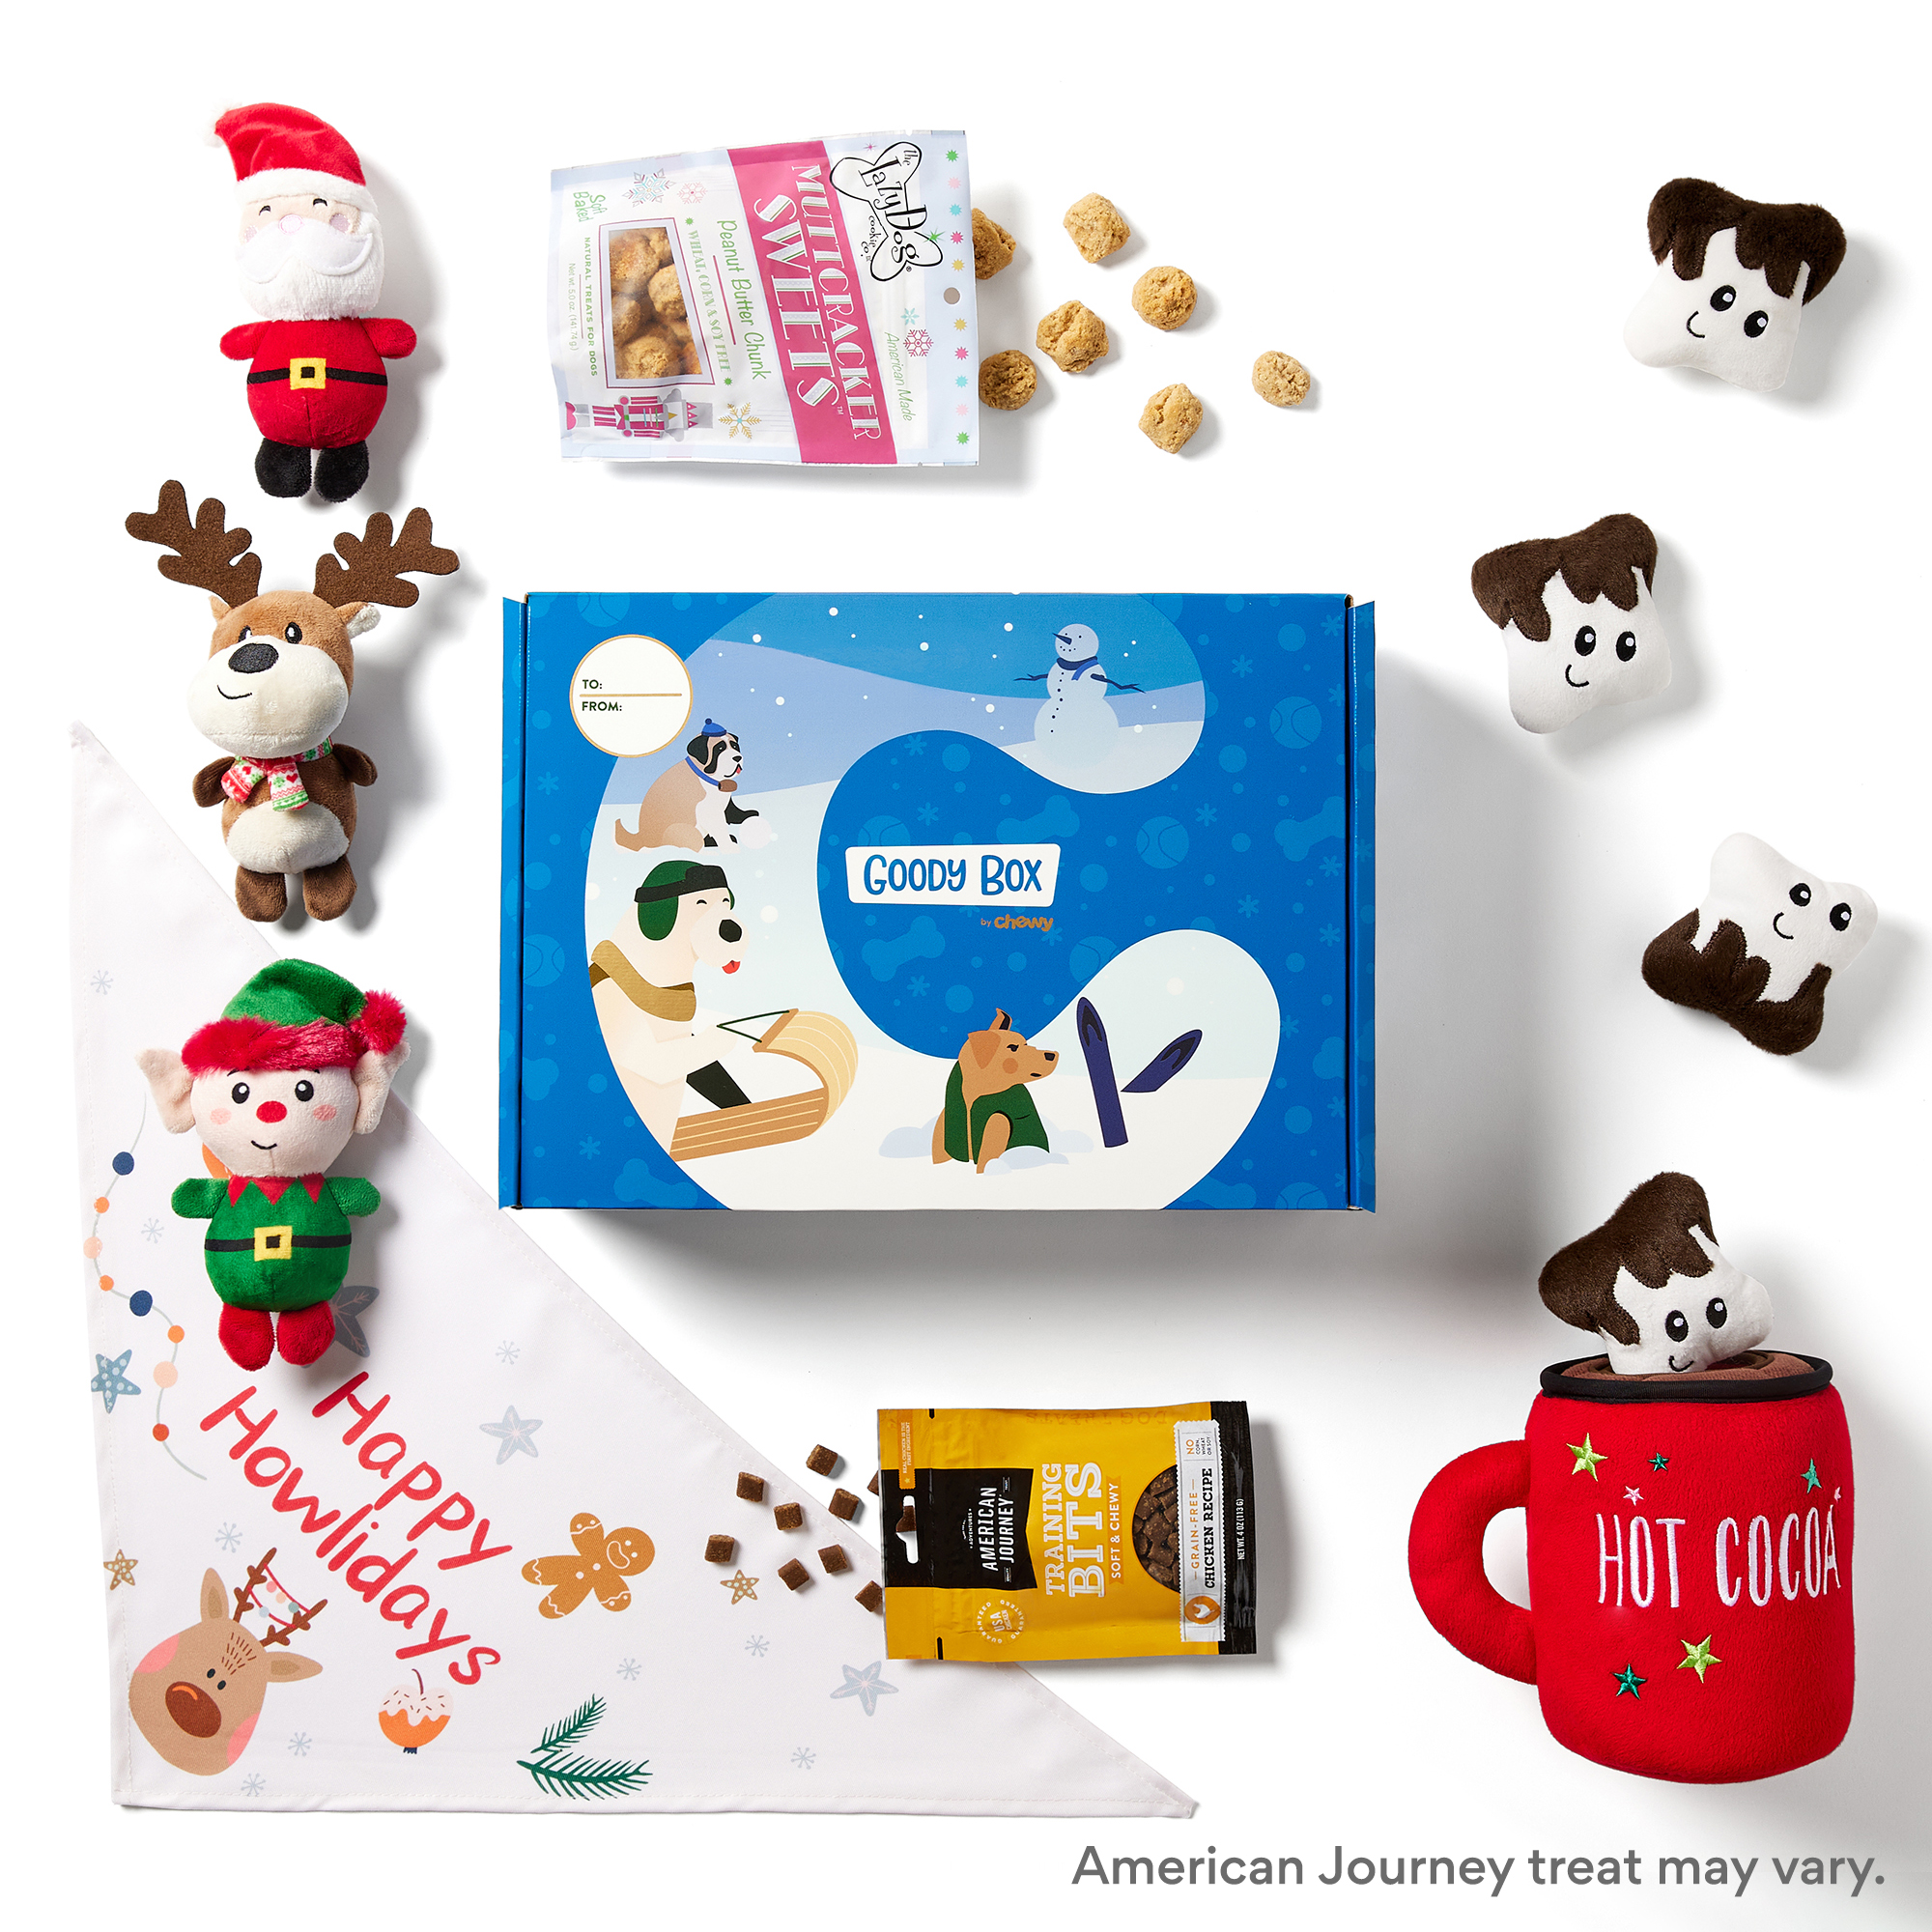 https://jamieo.co/wp-content/uploads/2022/11/5I-CHEWY-Goody-Box-Holiday-Dog-Toys-Treats-Accessories-Small-Medium.jpg